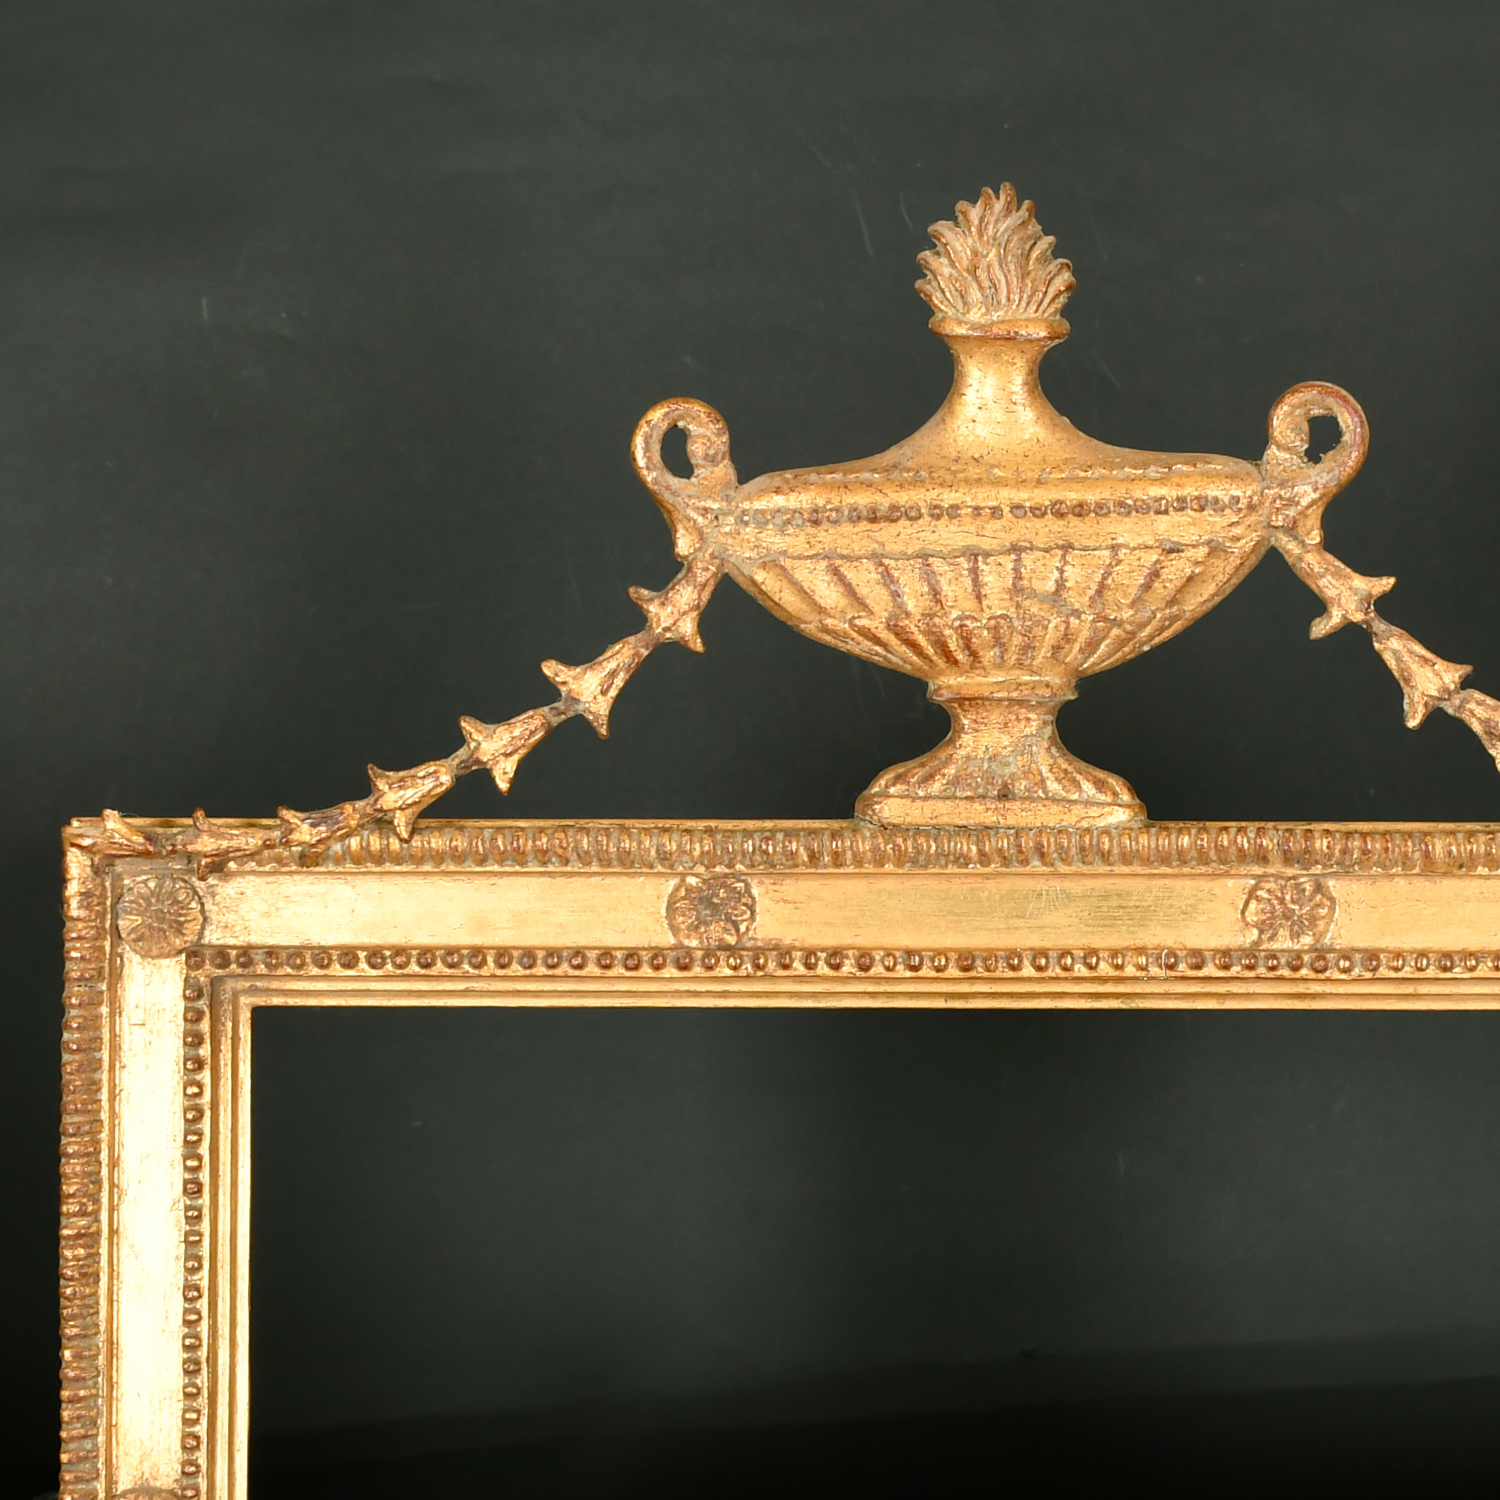 20th Century English School. A Gilt Composition frame, with an ornate top with an urn, rebate 23.25"